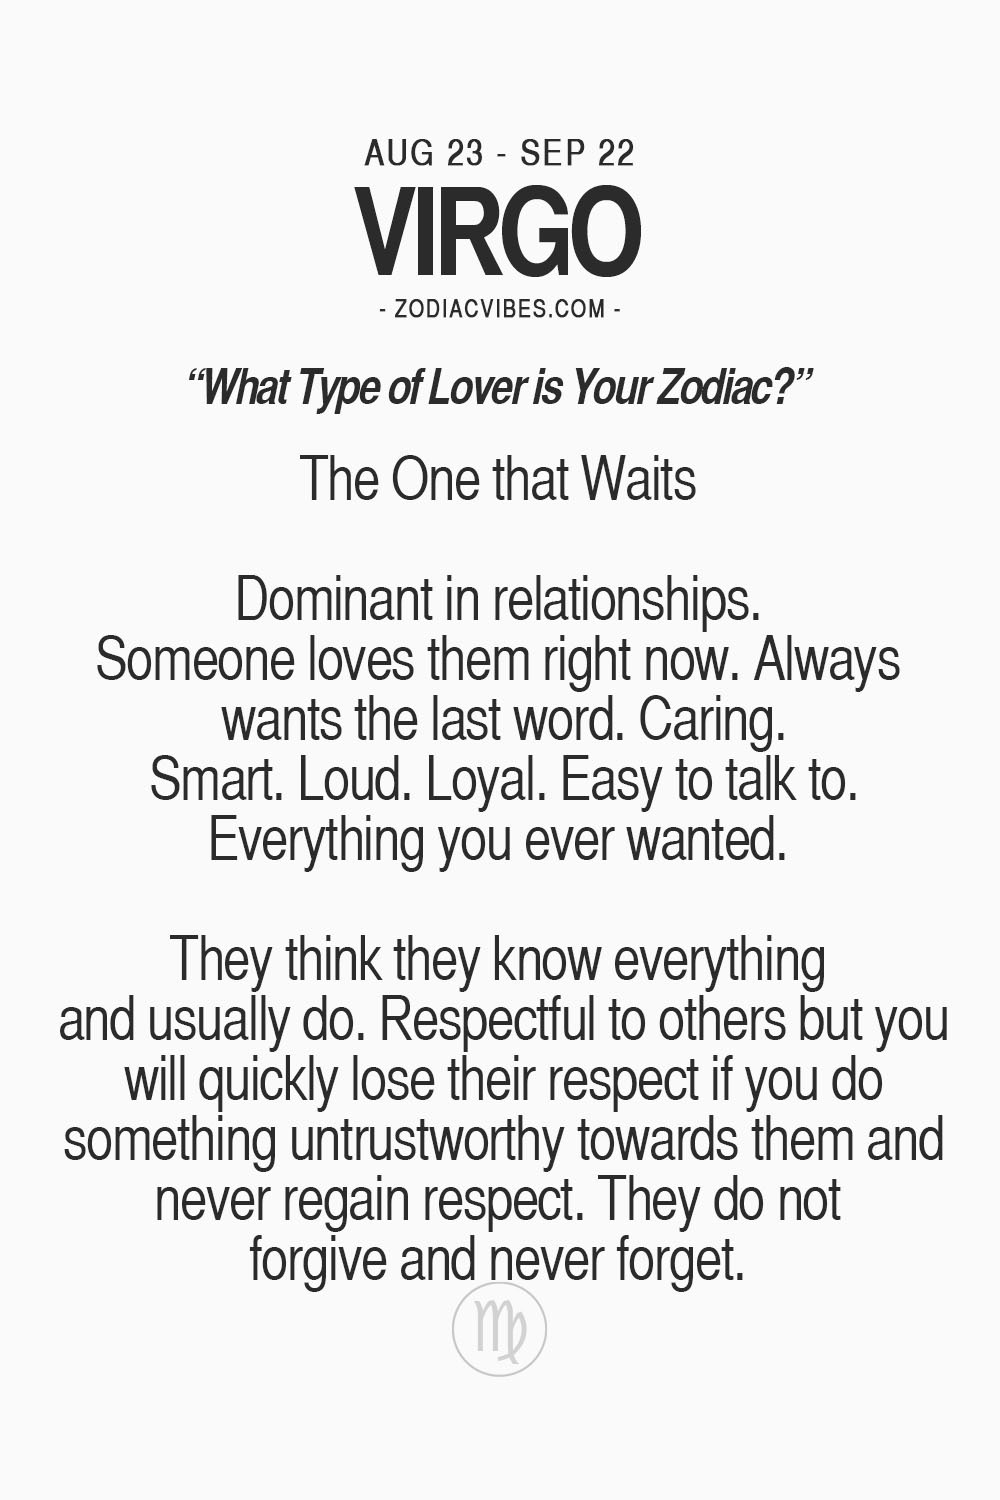 thezodiacvibes: What type of lover is your... - Let`s just breathe